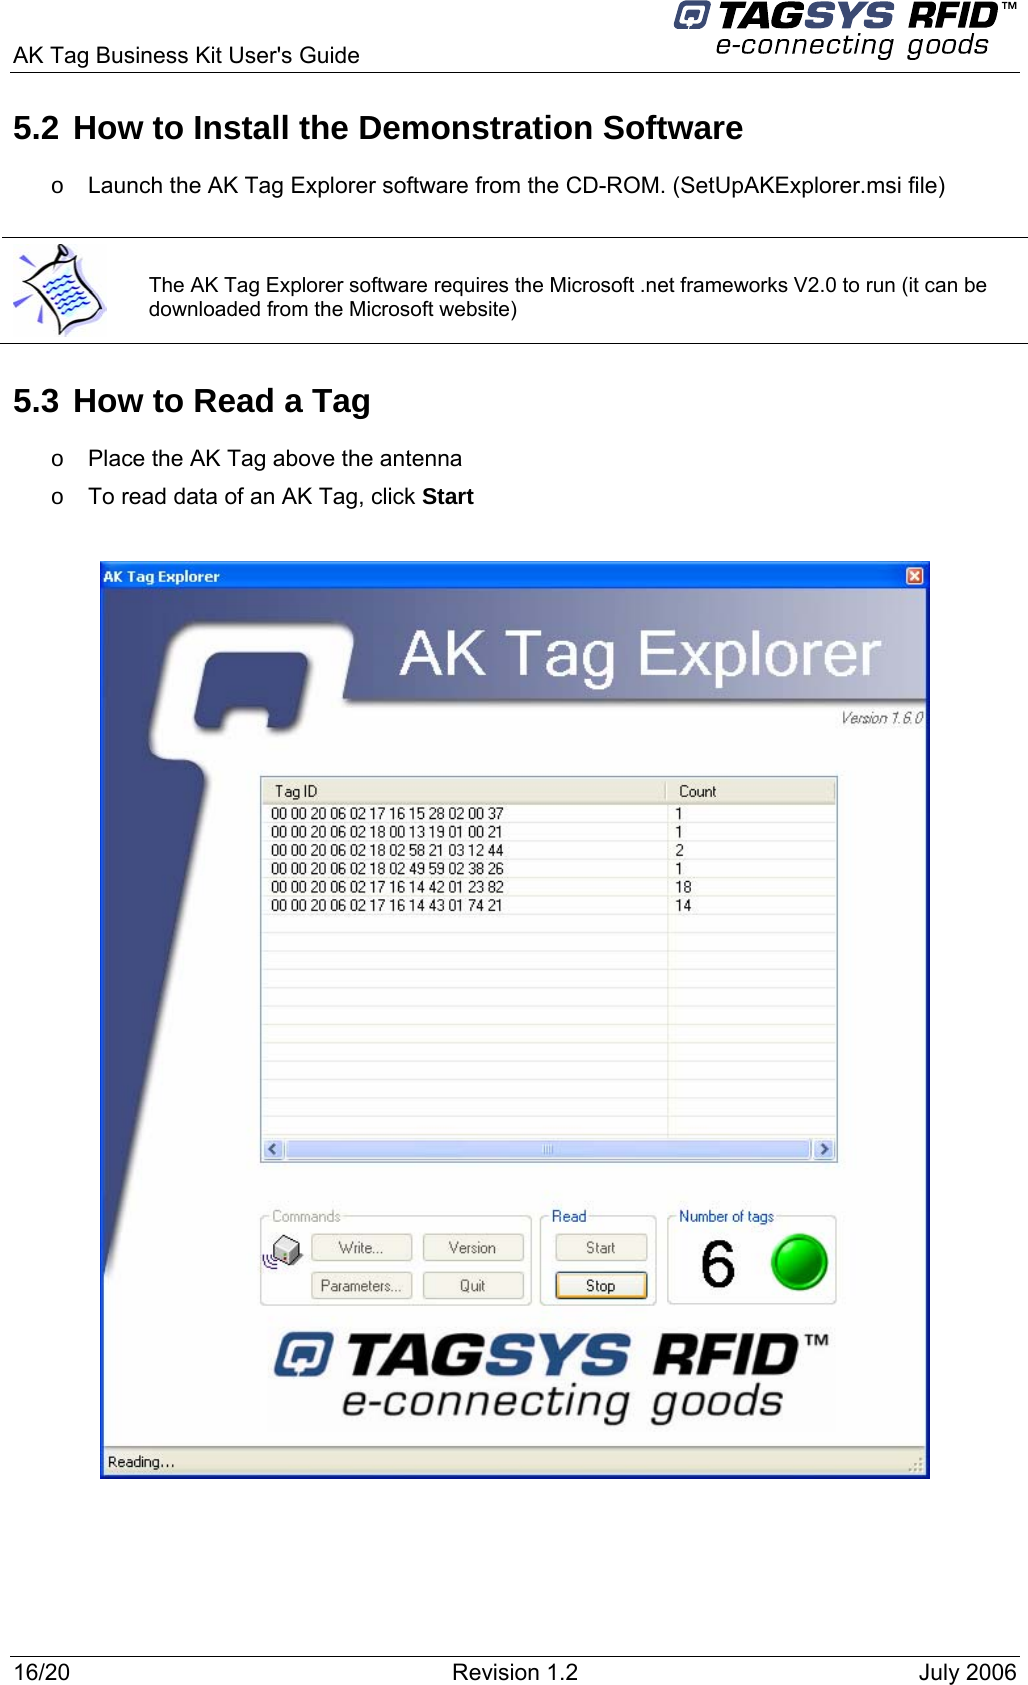  AK Tag Business Kit User&apos;s Guide     5.2 How to Install the Demonstration Software  o  Launch the AK Tag Explorer software from the CD-ROM. (SetUpAKExplorer.msi file)   The AK Tag Explorer software requires the Microsoft .net frameworks V2.0 to run (it can be downloaded from the Microsoft website) 5.3 How to Read a Tag o  Place the AK Tag above the antenna o  To read data of an AK Tag, click Start    16/20  Revision 1.2  July 2006 